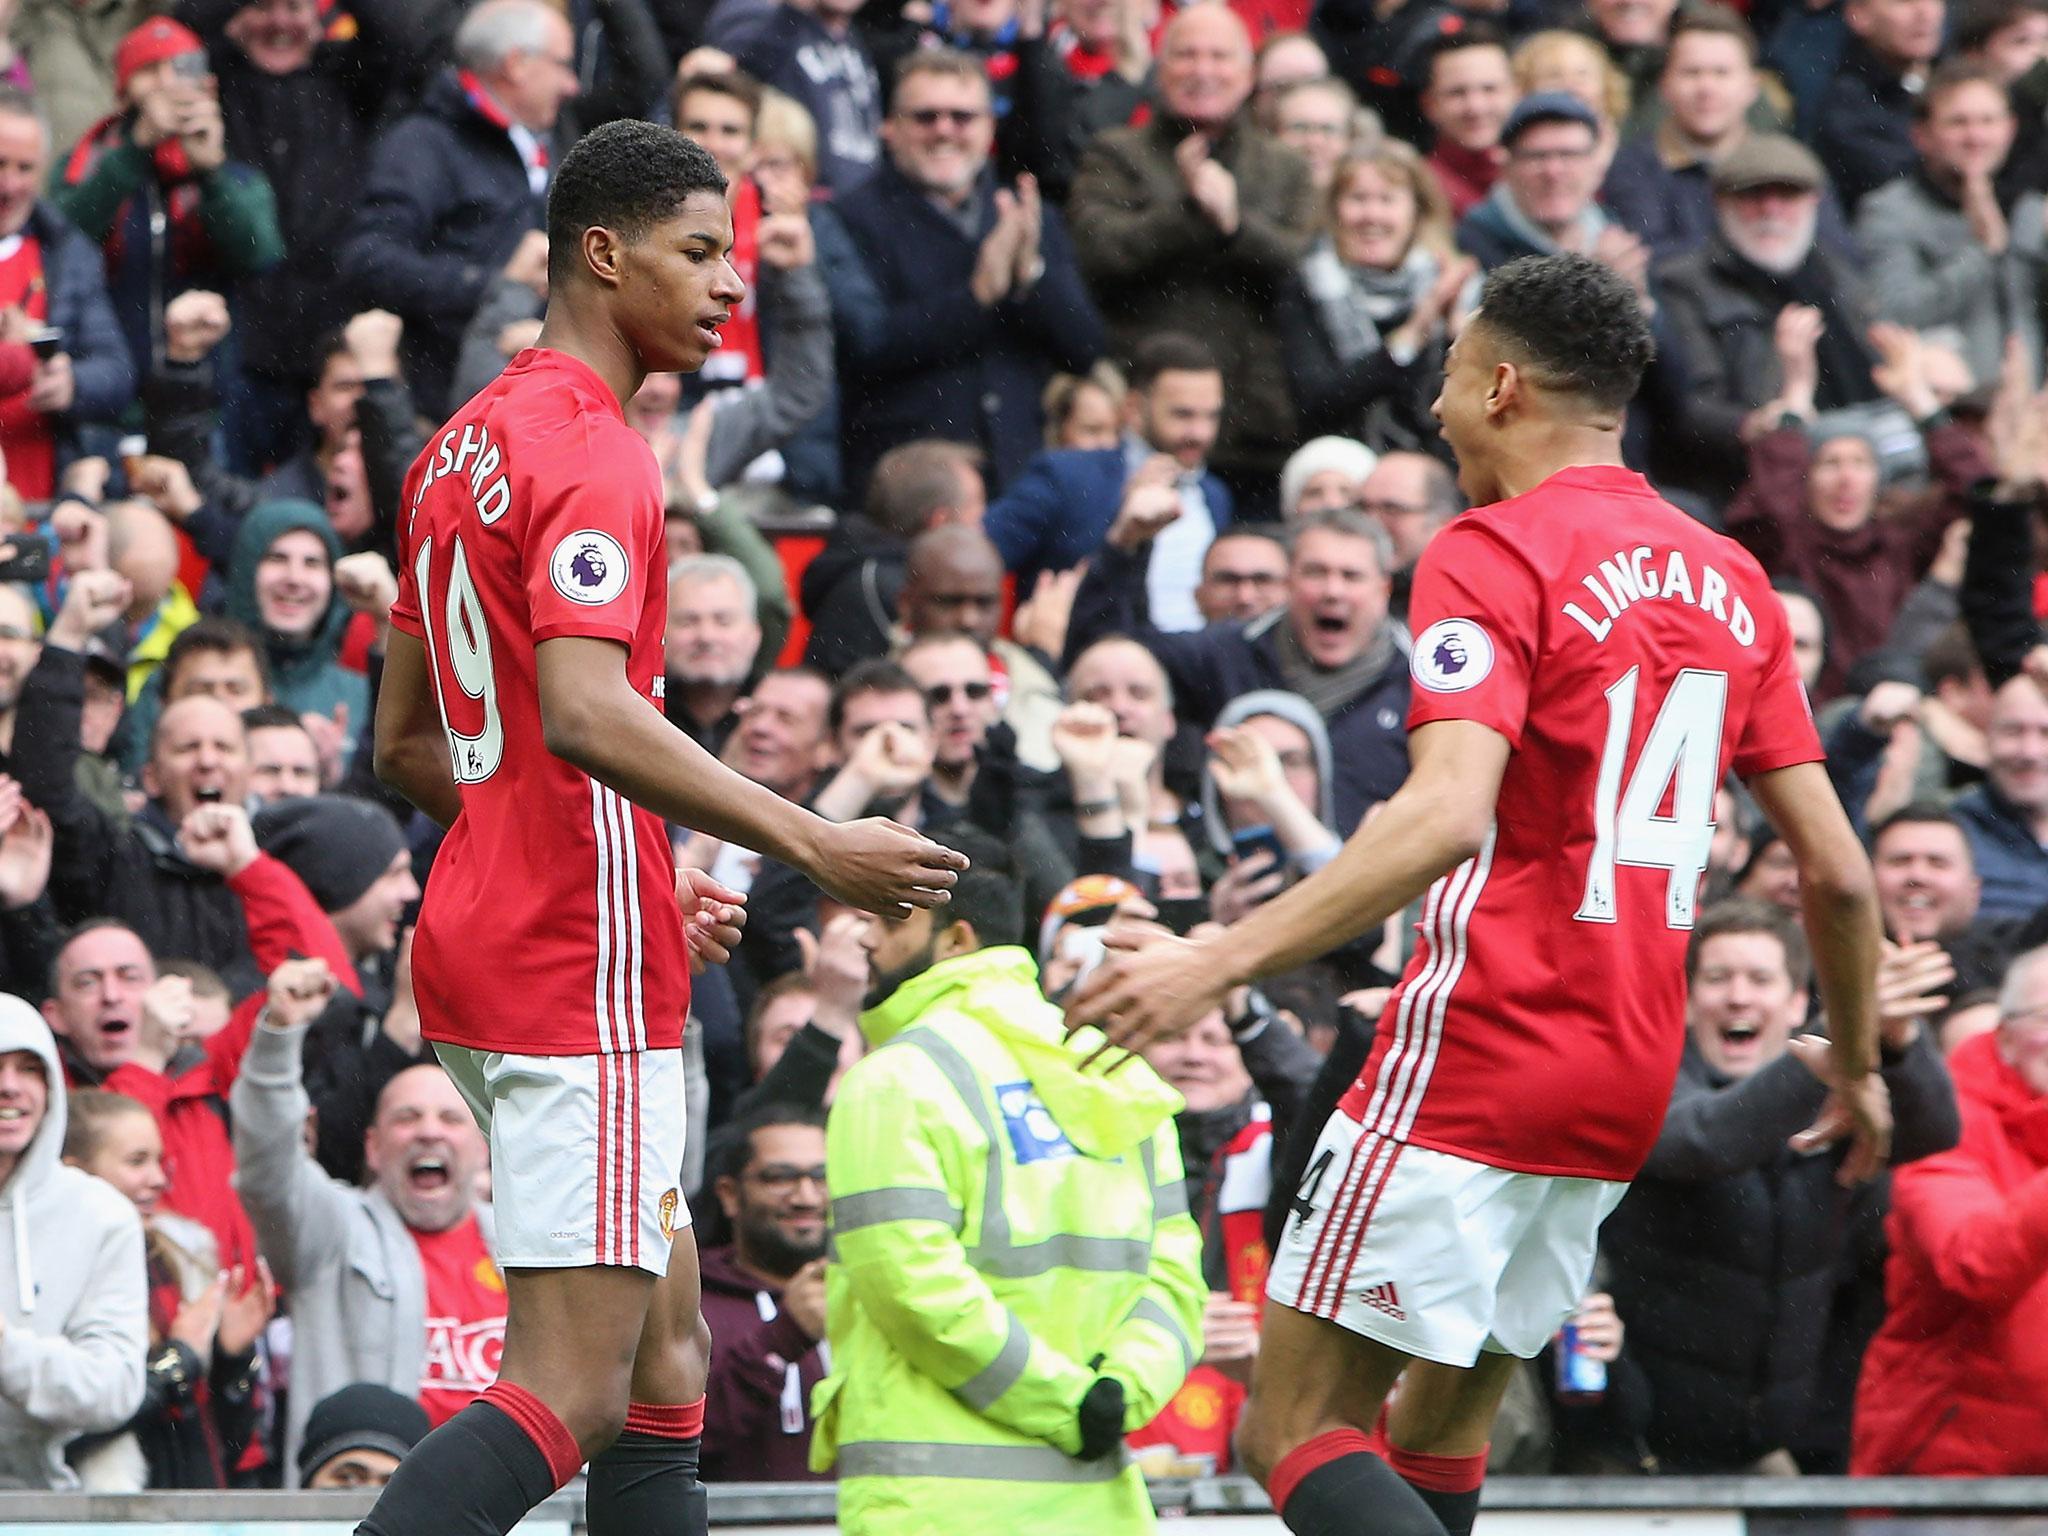 Marcus Rashford and Jesse Lingard gave Manchester United an electricity rarely seen this season